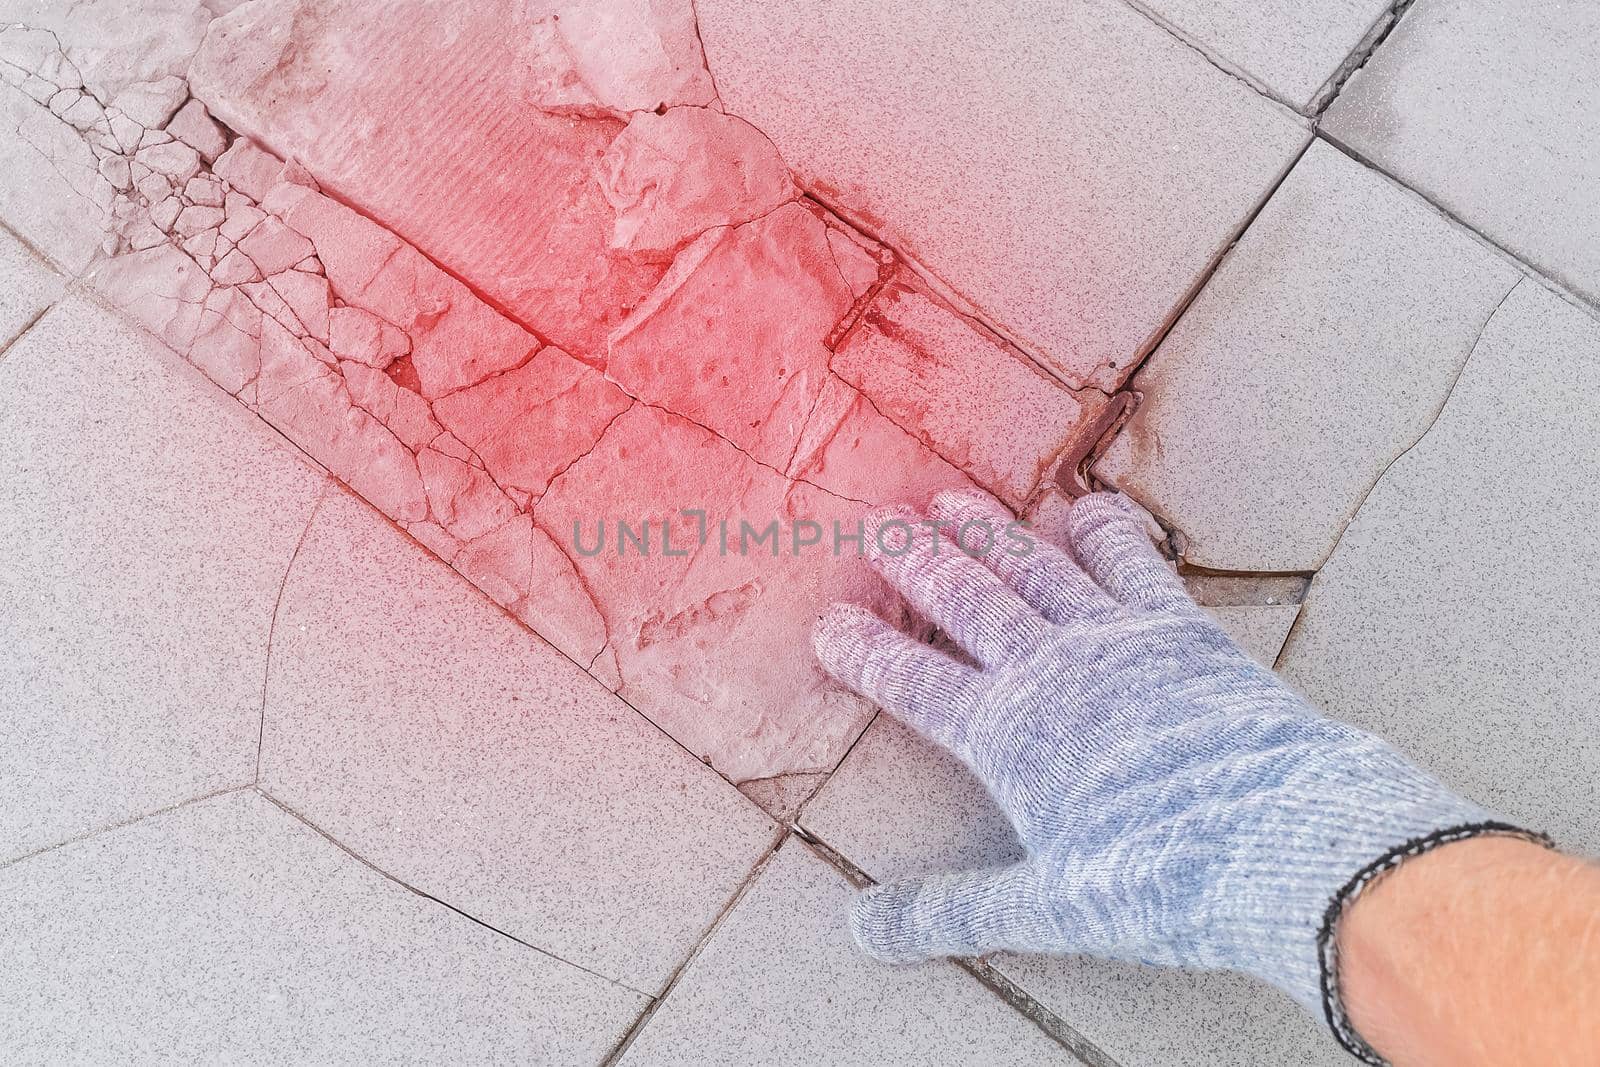 Hand of male construction worker in protective gloves examines old broken tile floor background. Renovation concept.